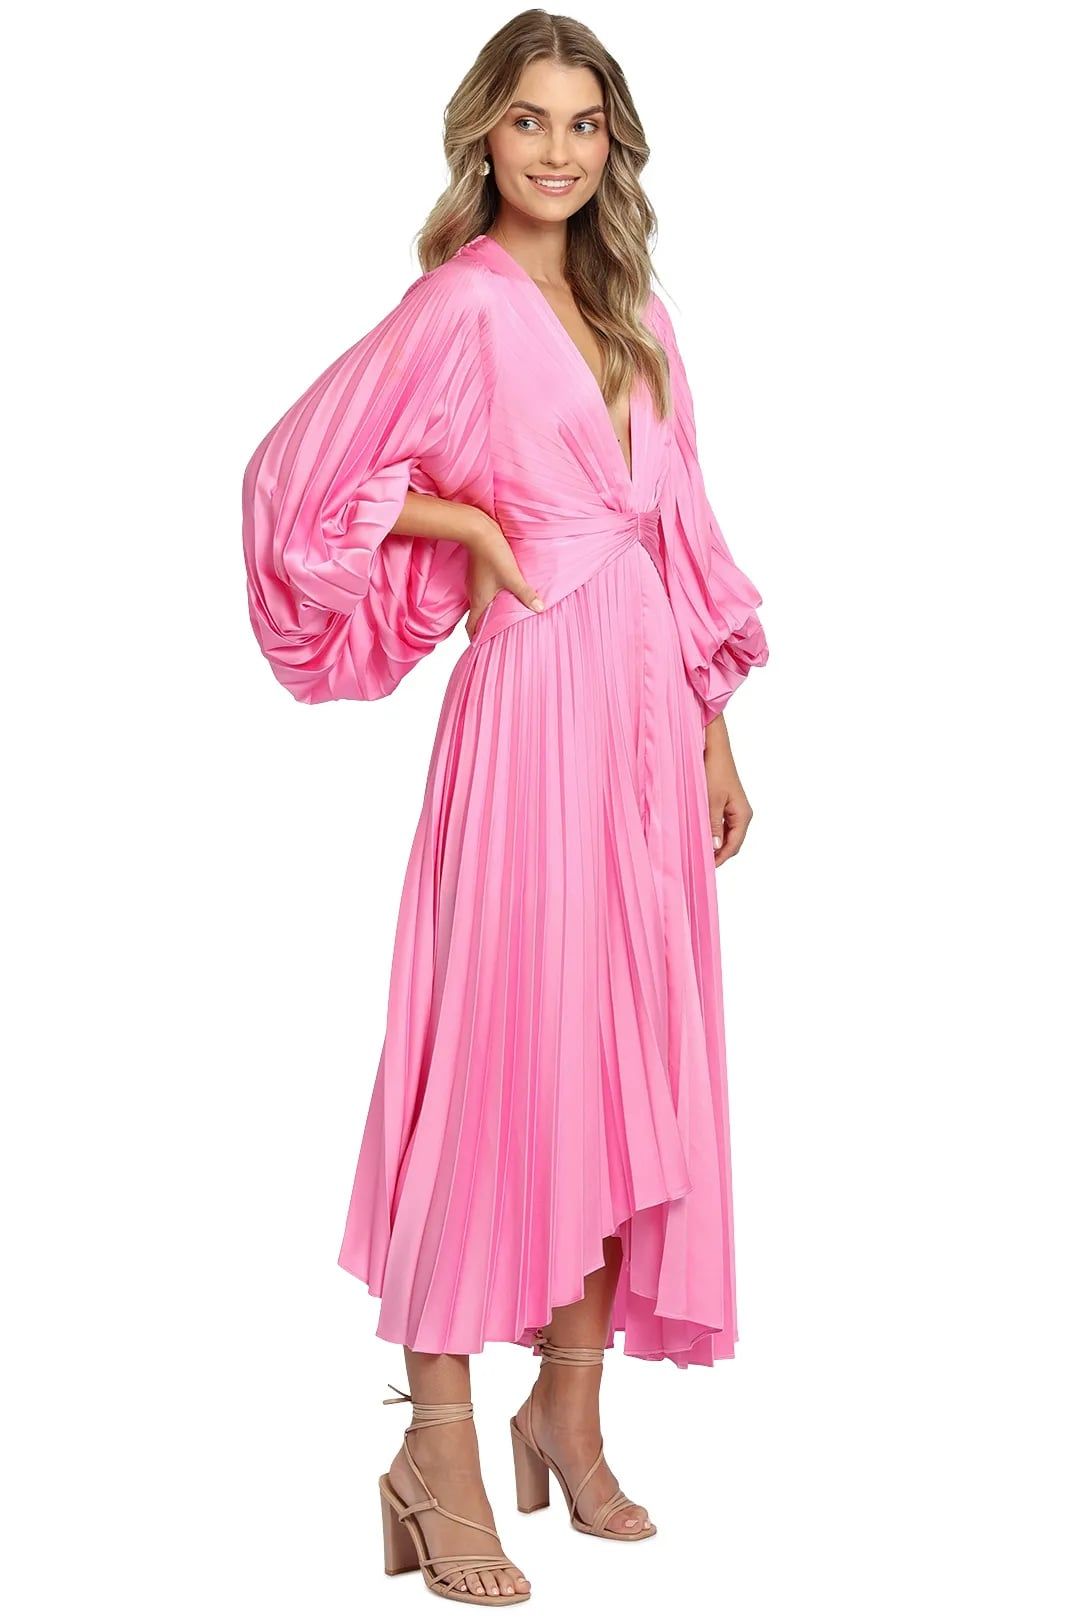 Rent Palms dress in pink for spring events.